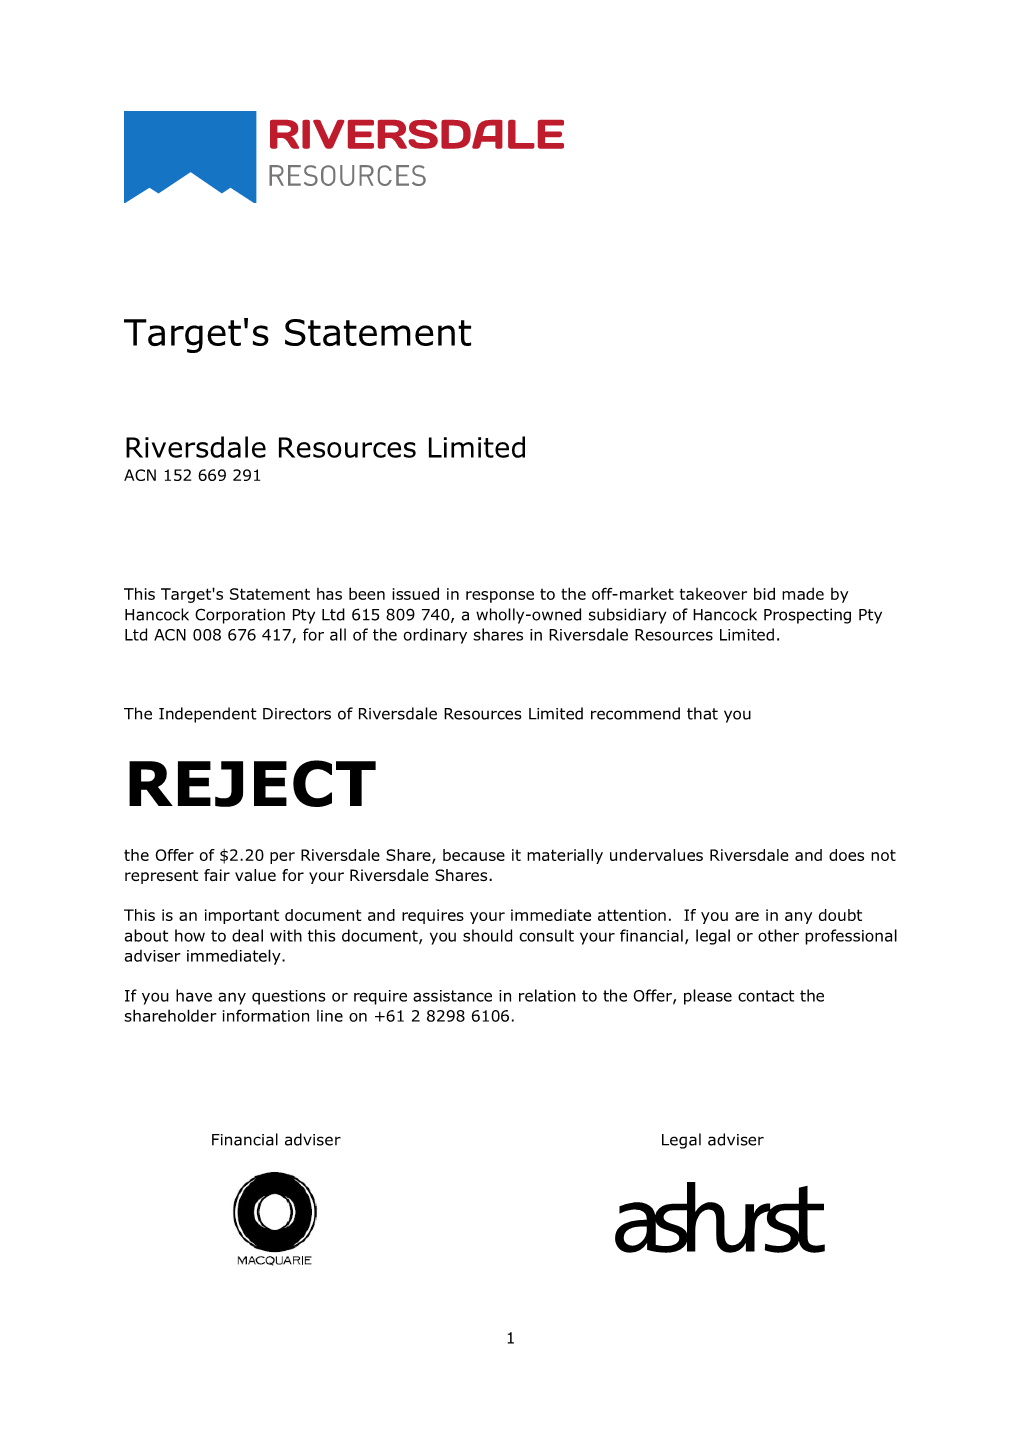 Riversdale Resources Target's Statement, 28 March 2019